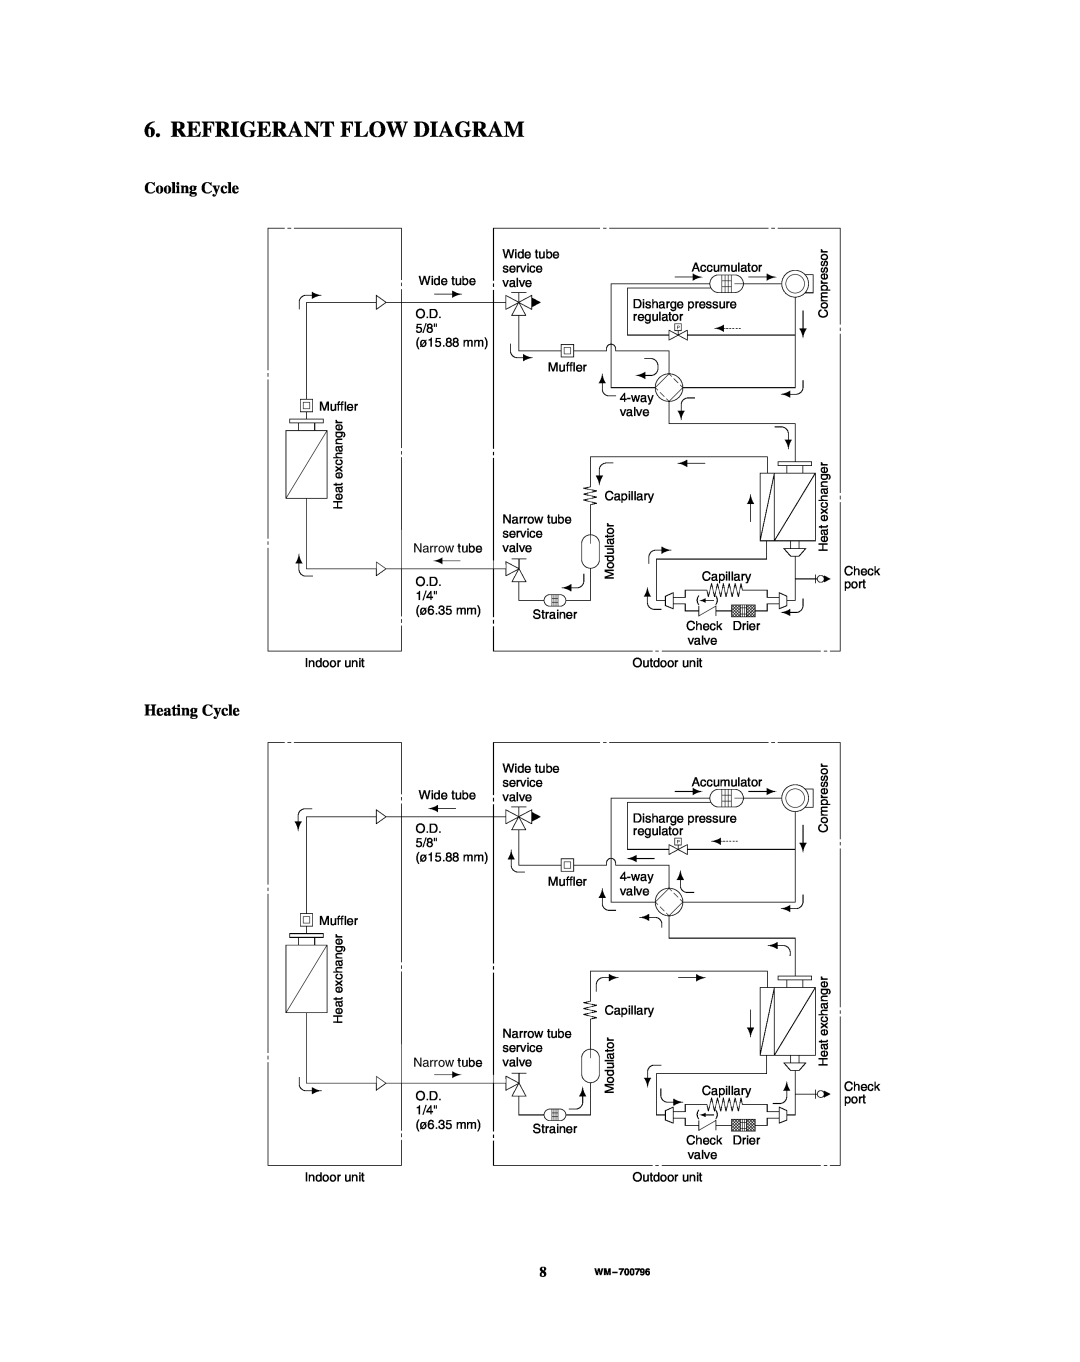 Sanyo KHS1822, CH1822 service manual Refrigerant Flow Diagram, Cooling Cycle, Heating Cycle 